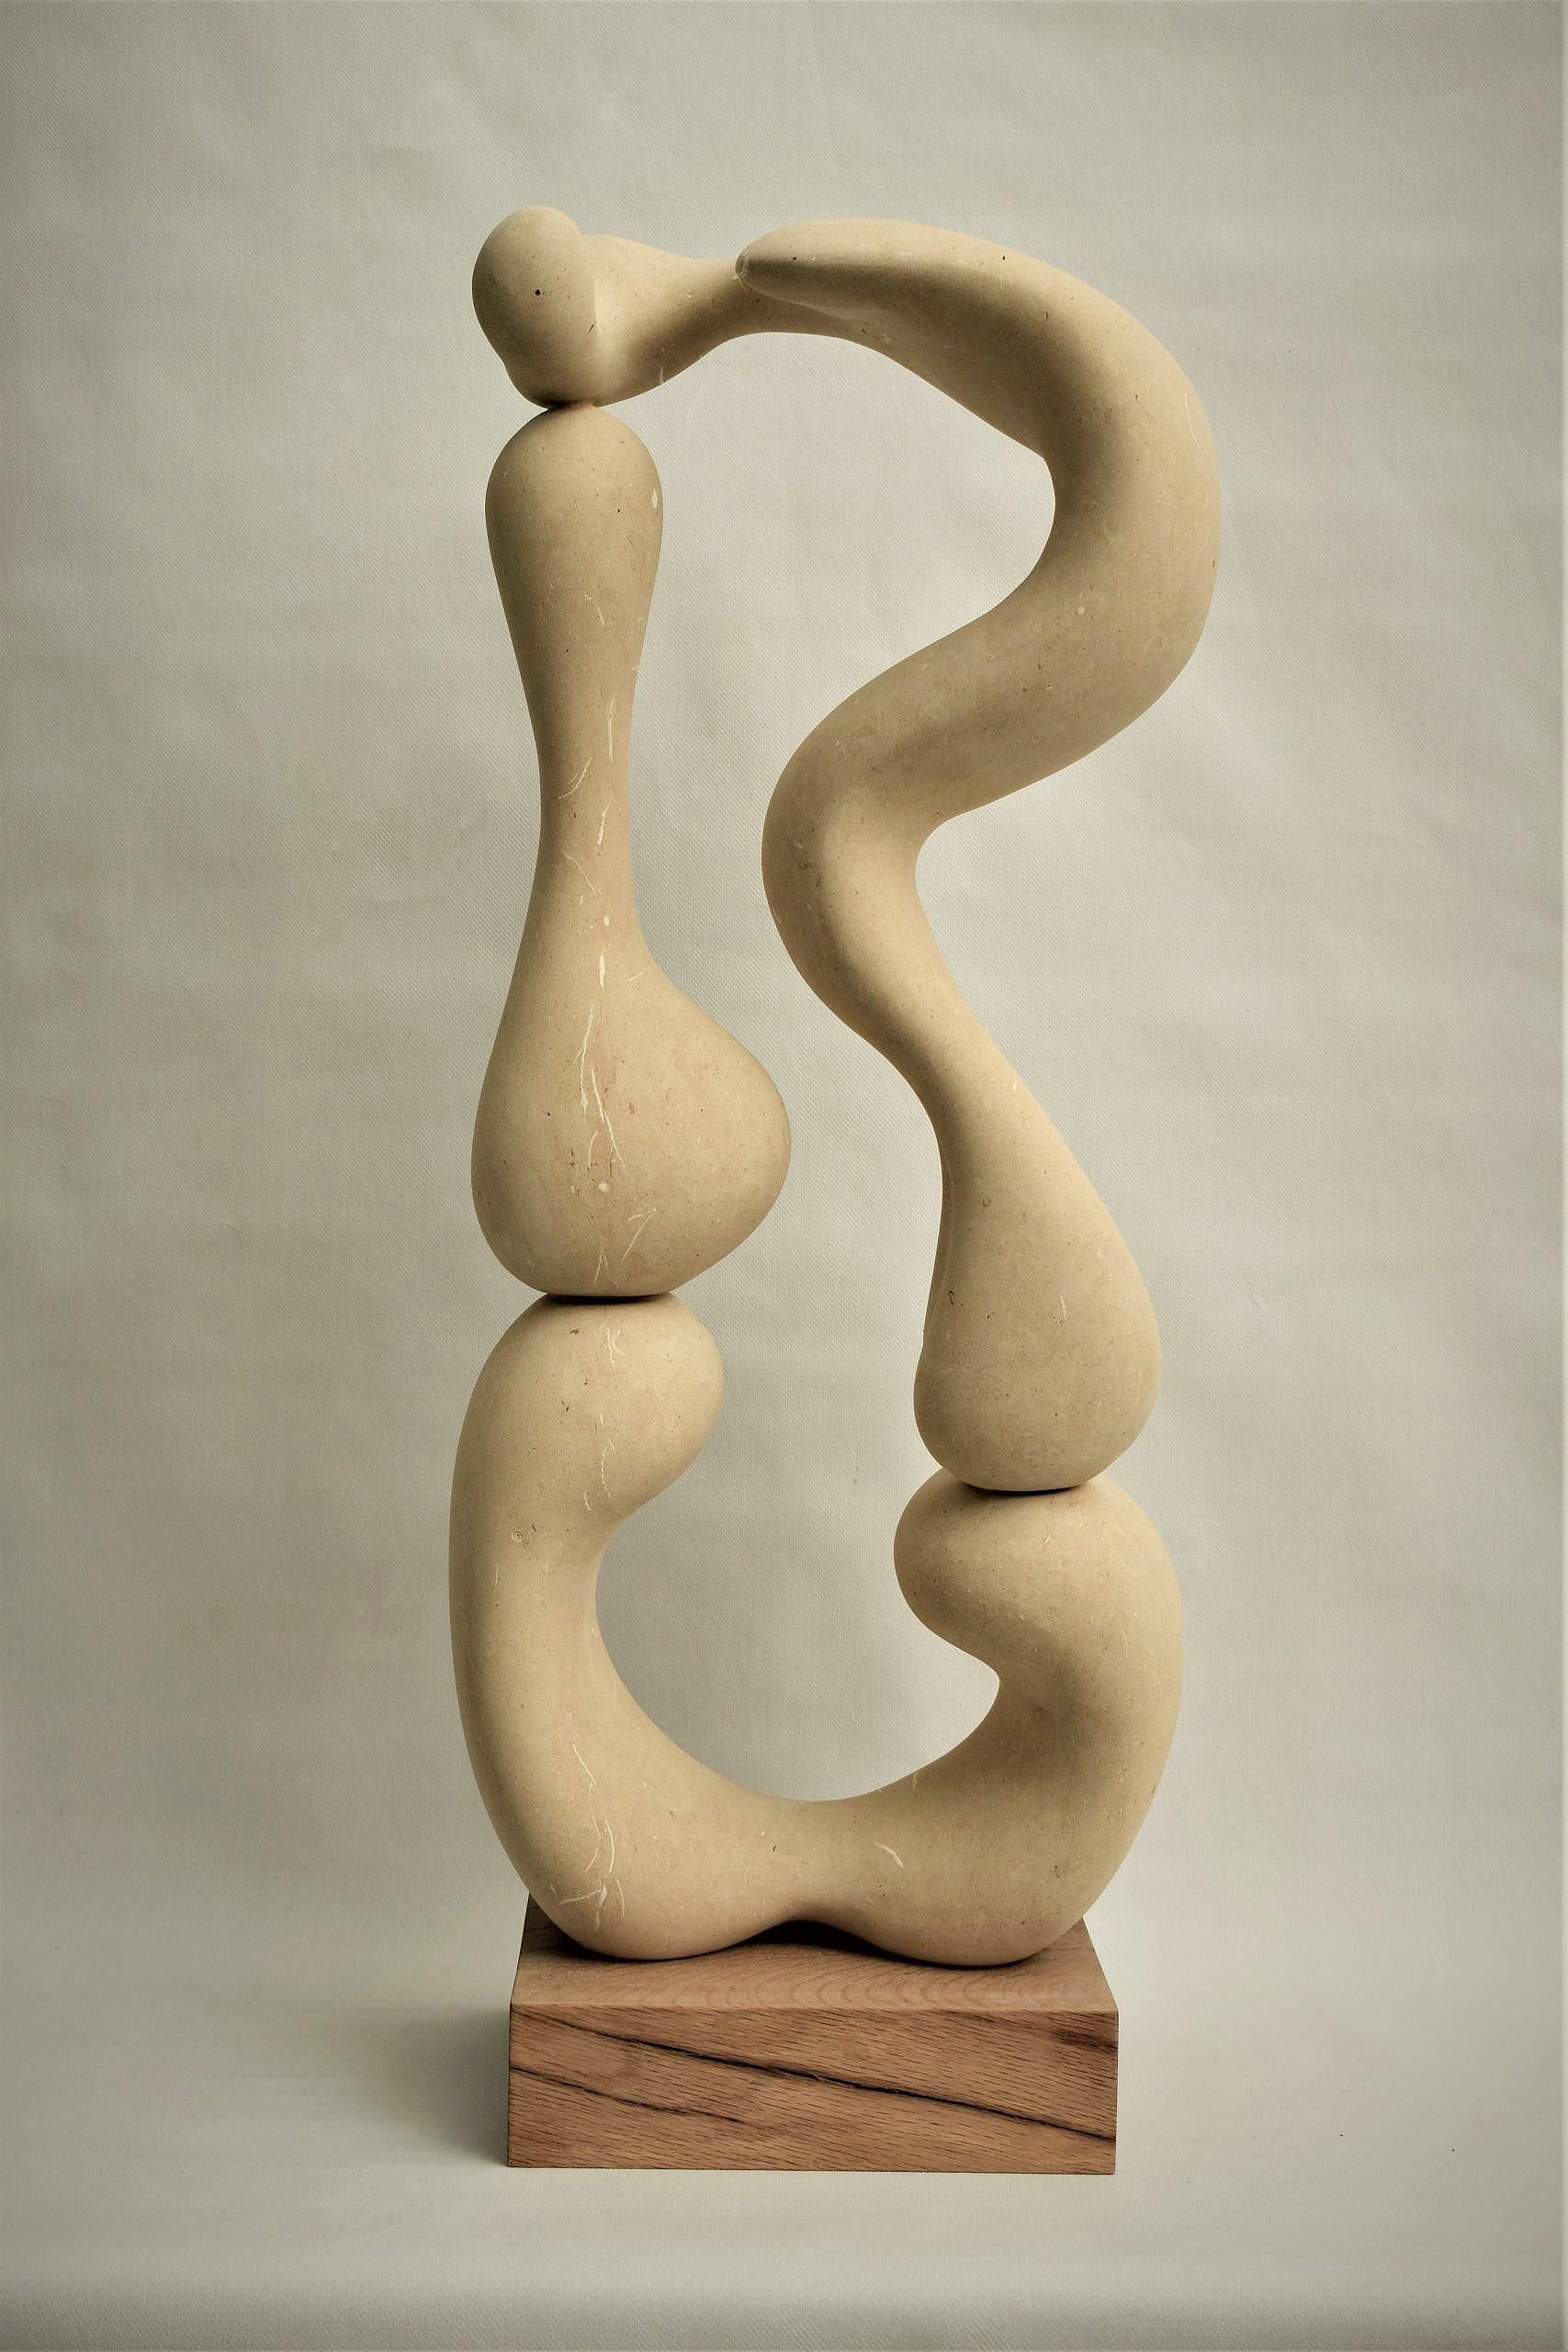 Italian 21st Century Abstract Sculpture Cellulae 80 Cm Height by Renzo Buttazzo For Sale